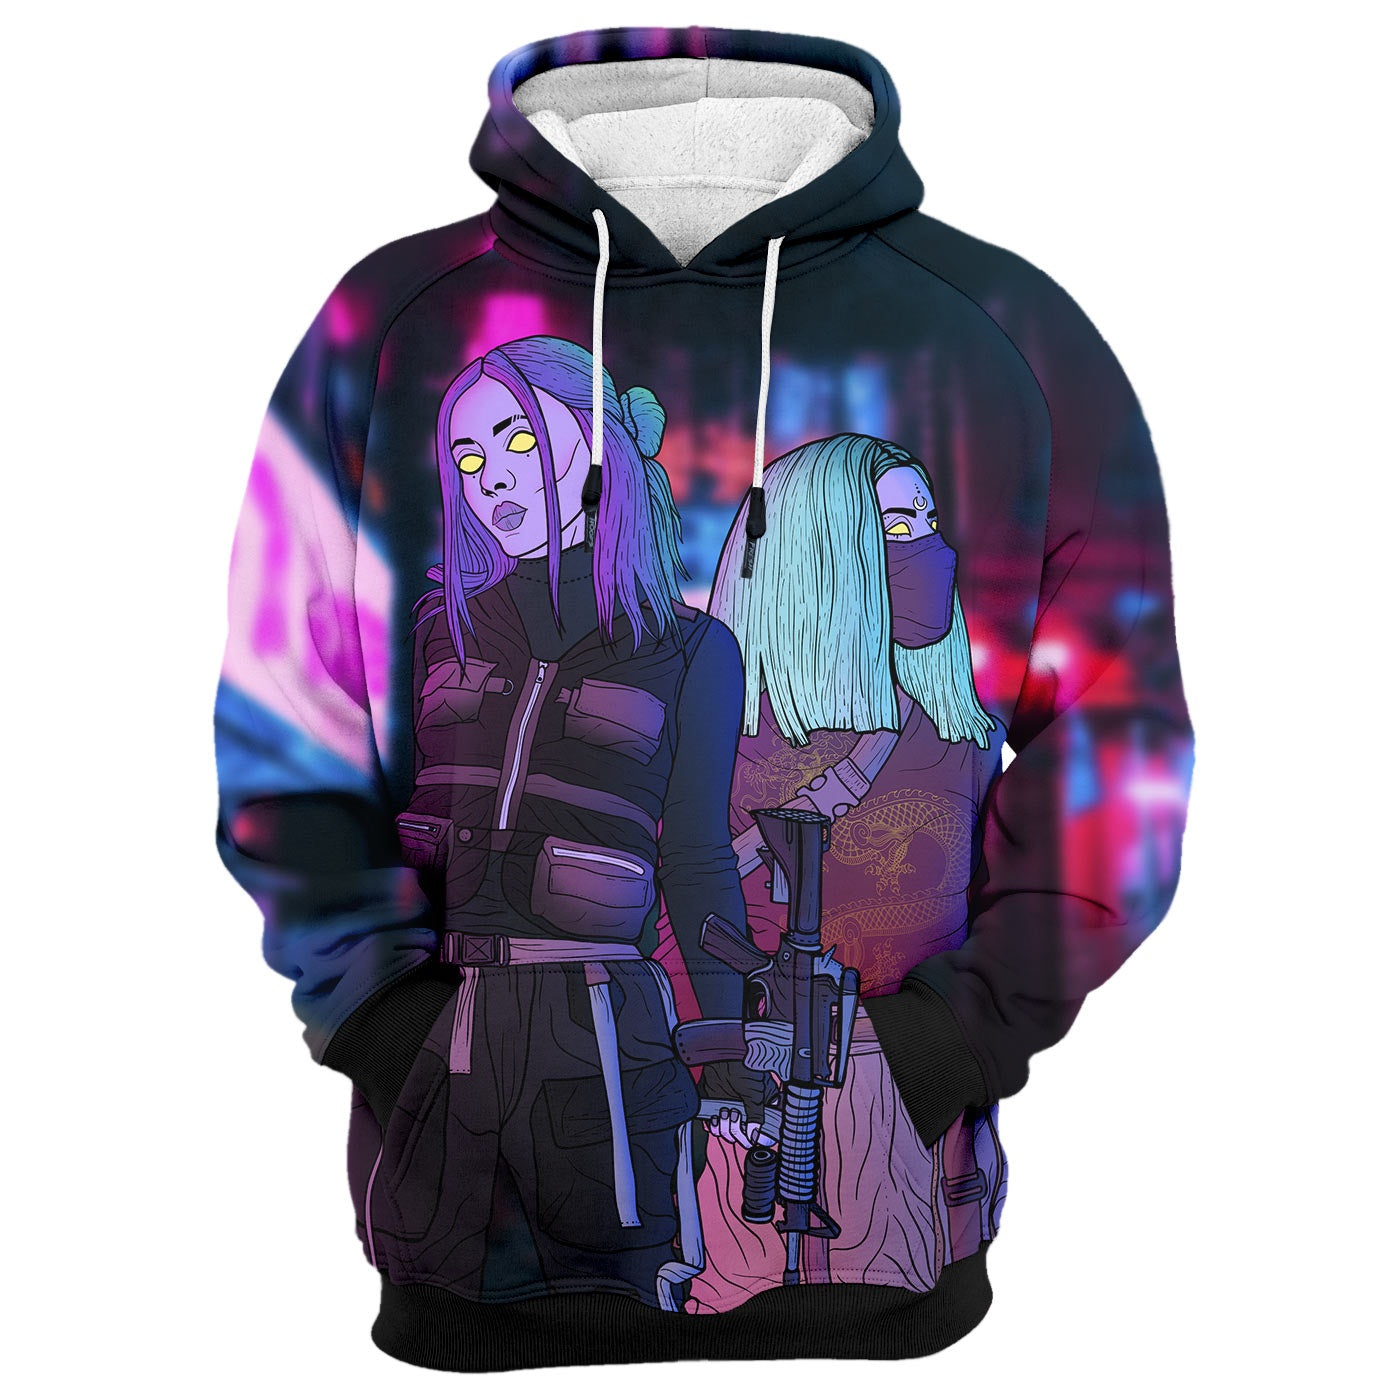 ⚡ Cyber Small Hoodie ⚡